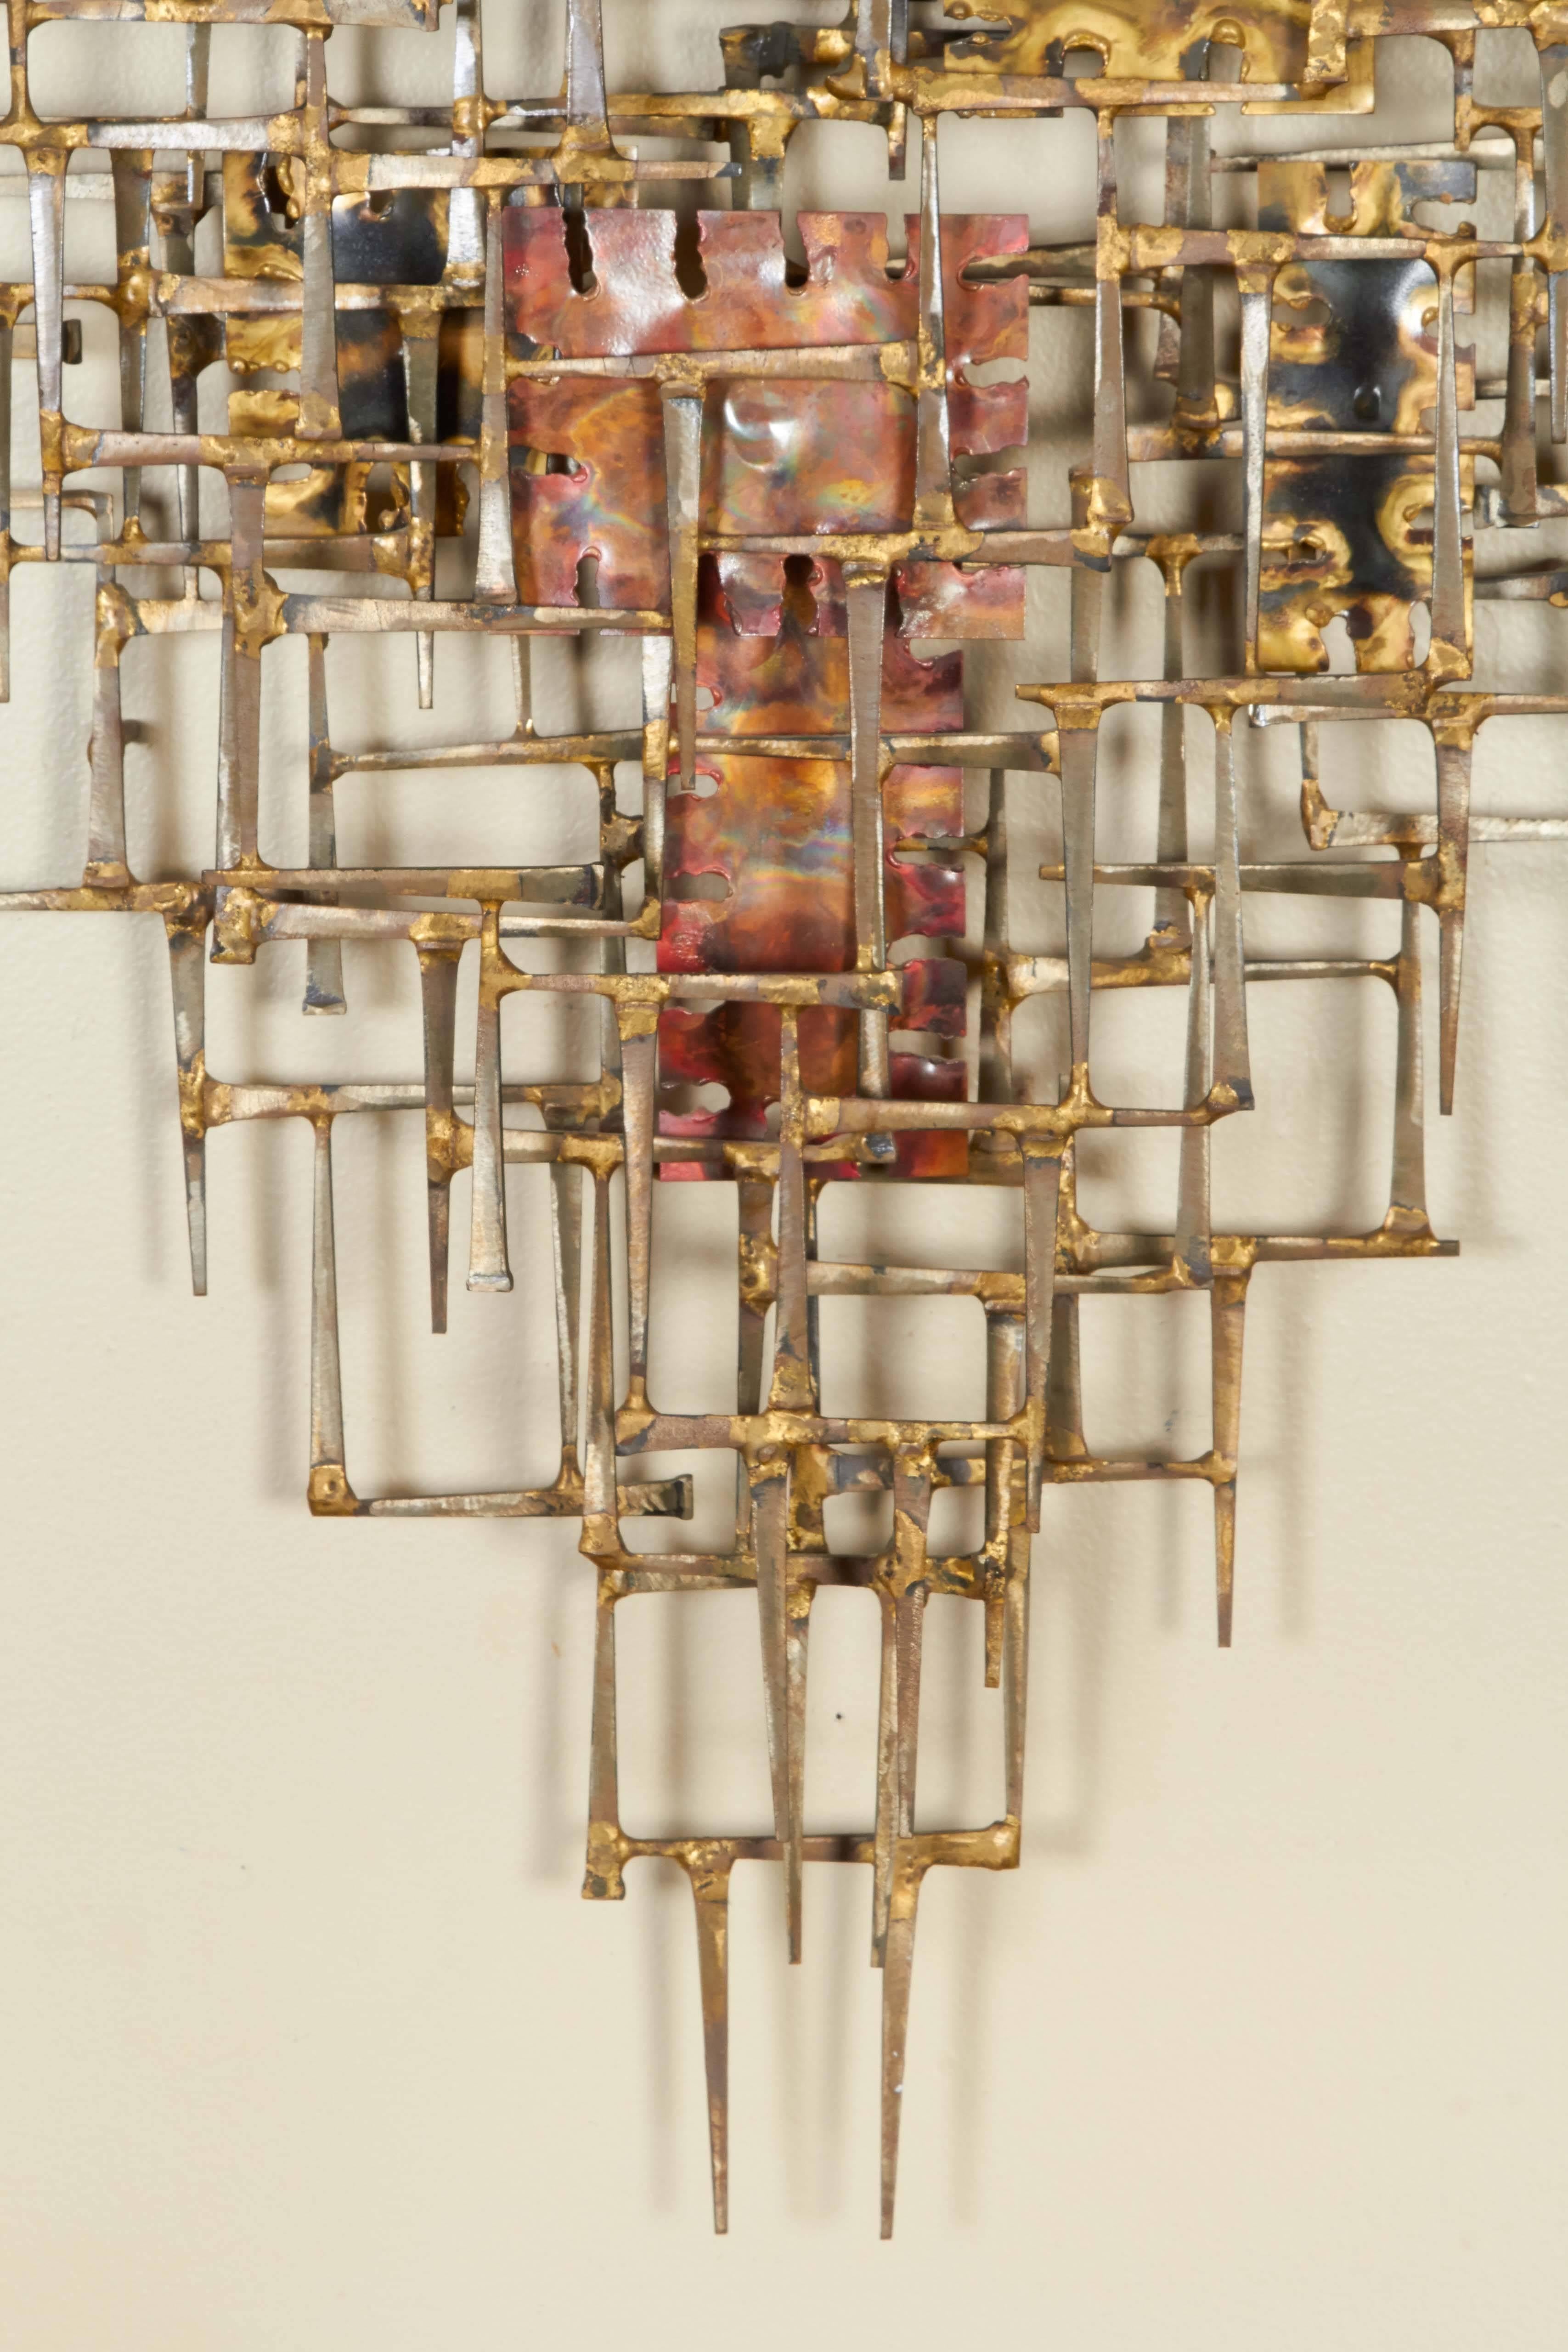 A Brutalist abstract wall mount sculpture by Silas Seandel, hand-wrought and crafted of gilt and enameled mixed metals in gold and red tones, circa 1970s. Signed Silas on the back of the sculpture. Very good vintage condition, consistent with age